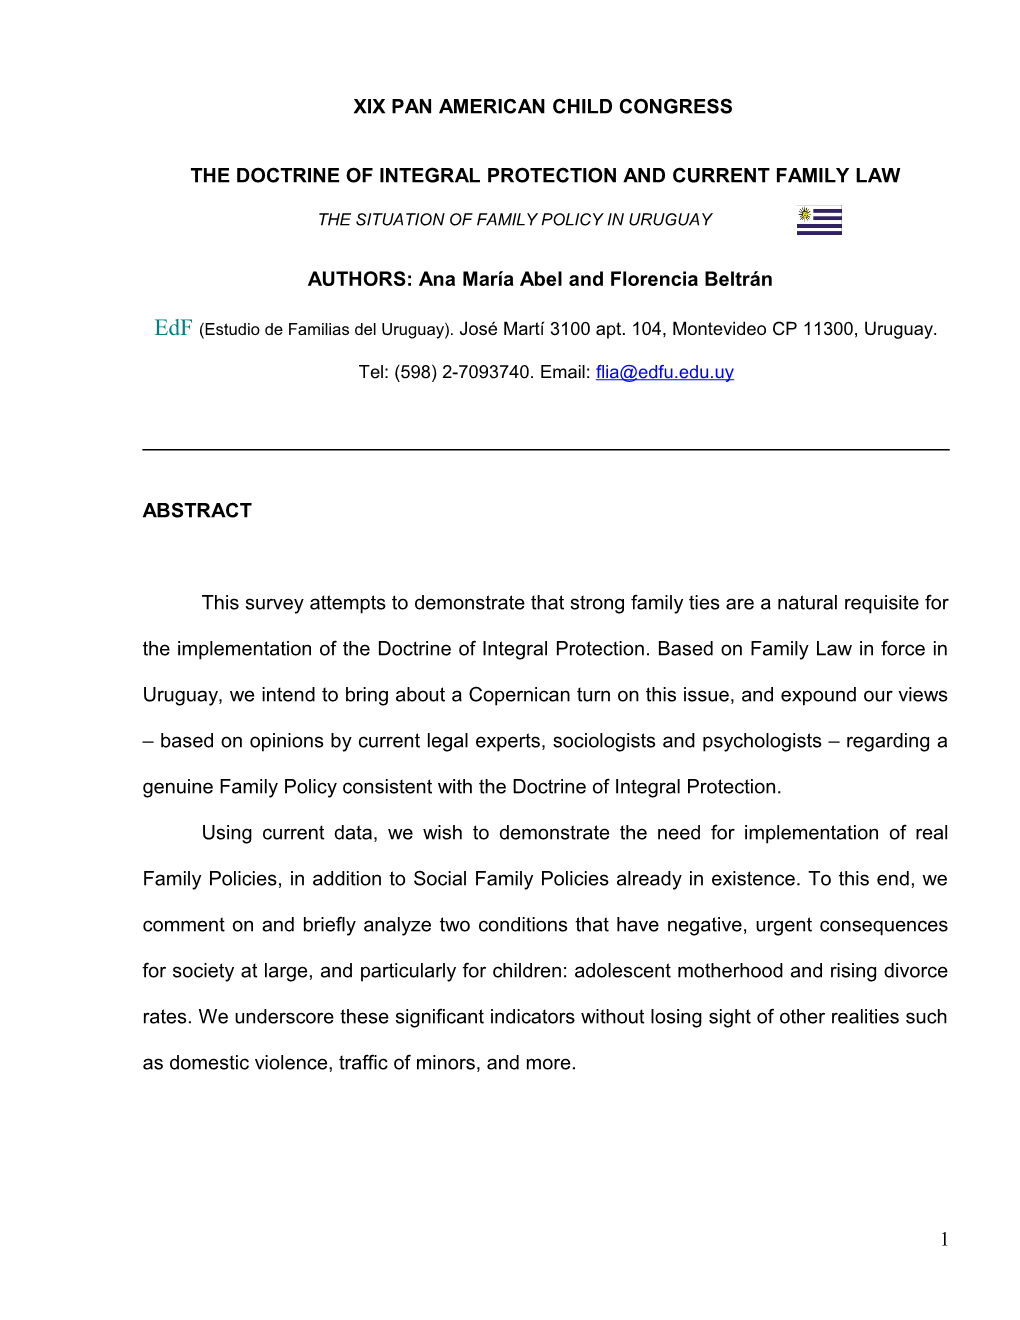 The Doctrine of Integral Protection and Current Family Law